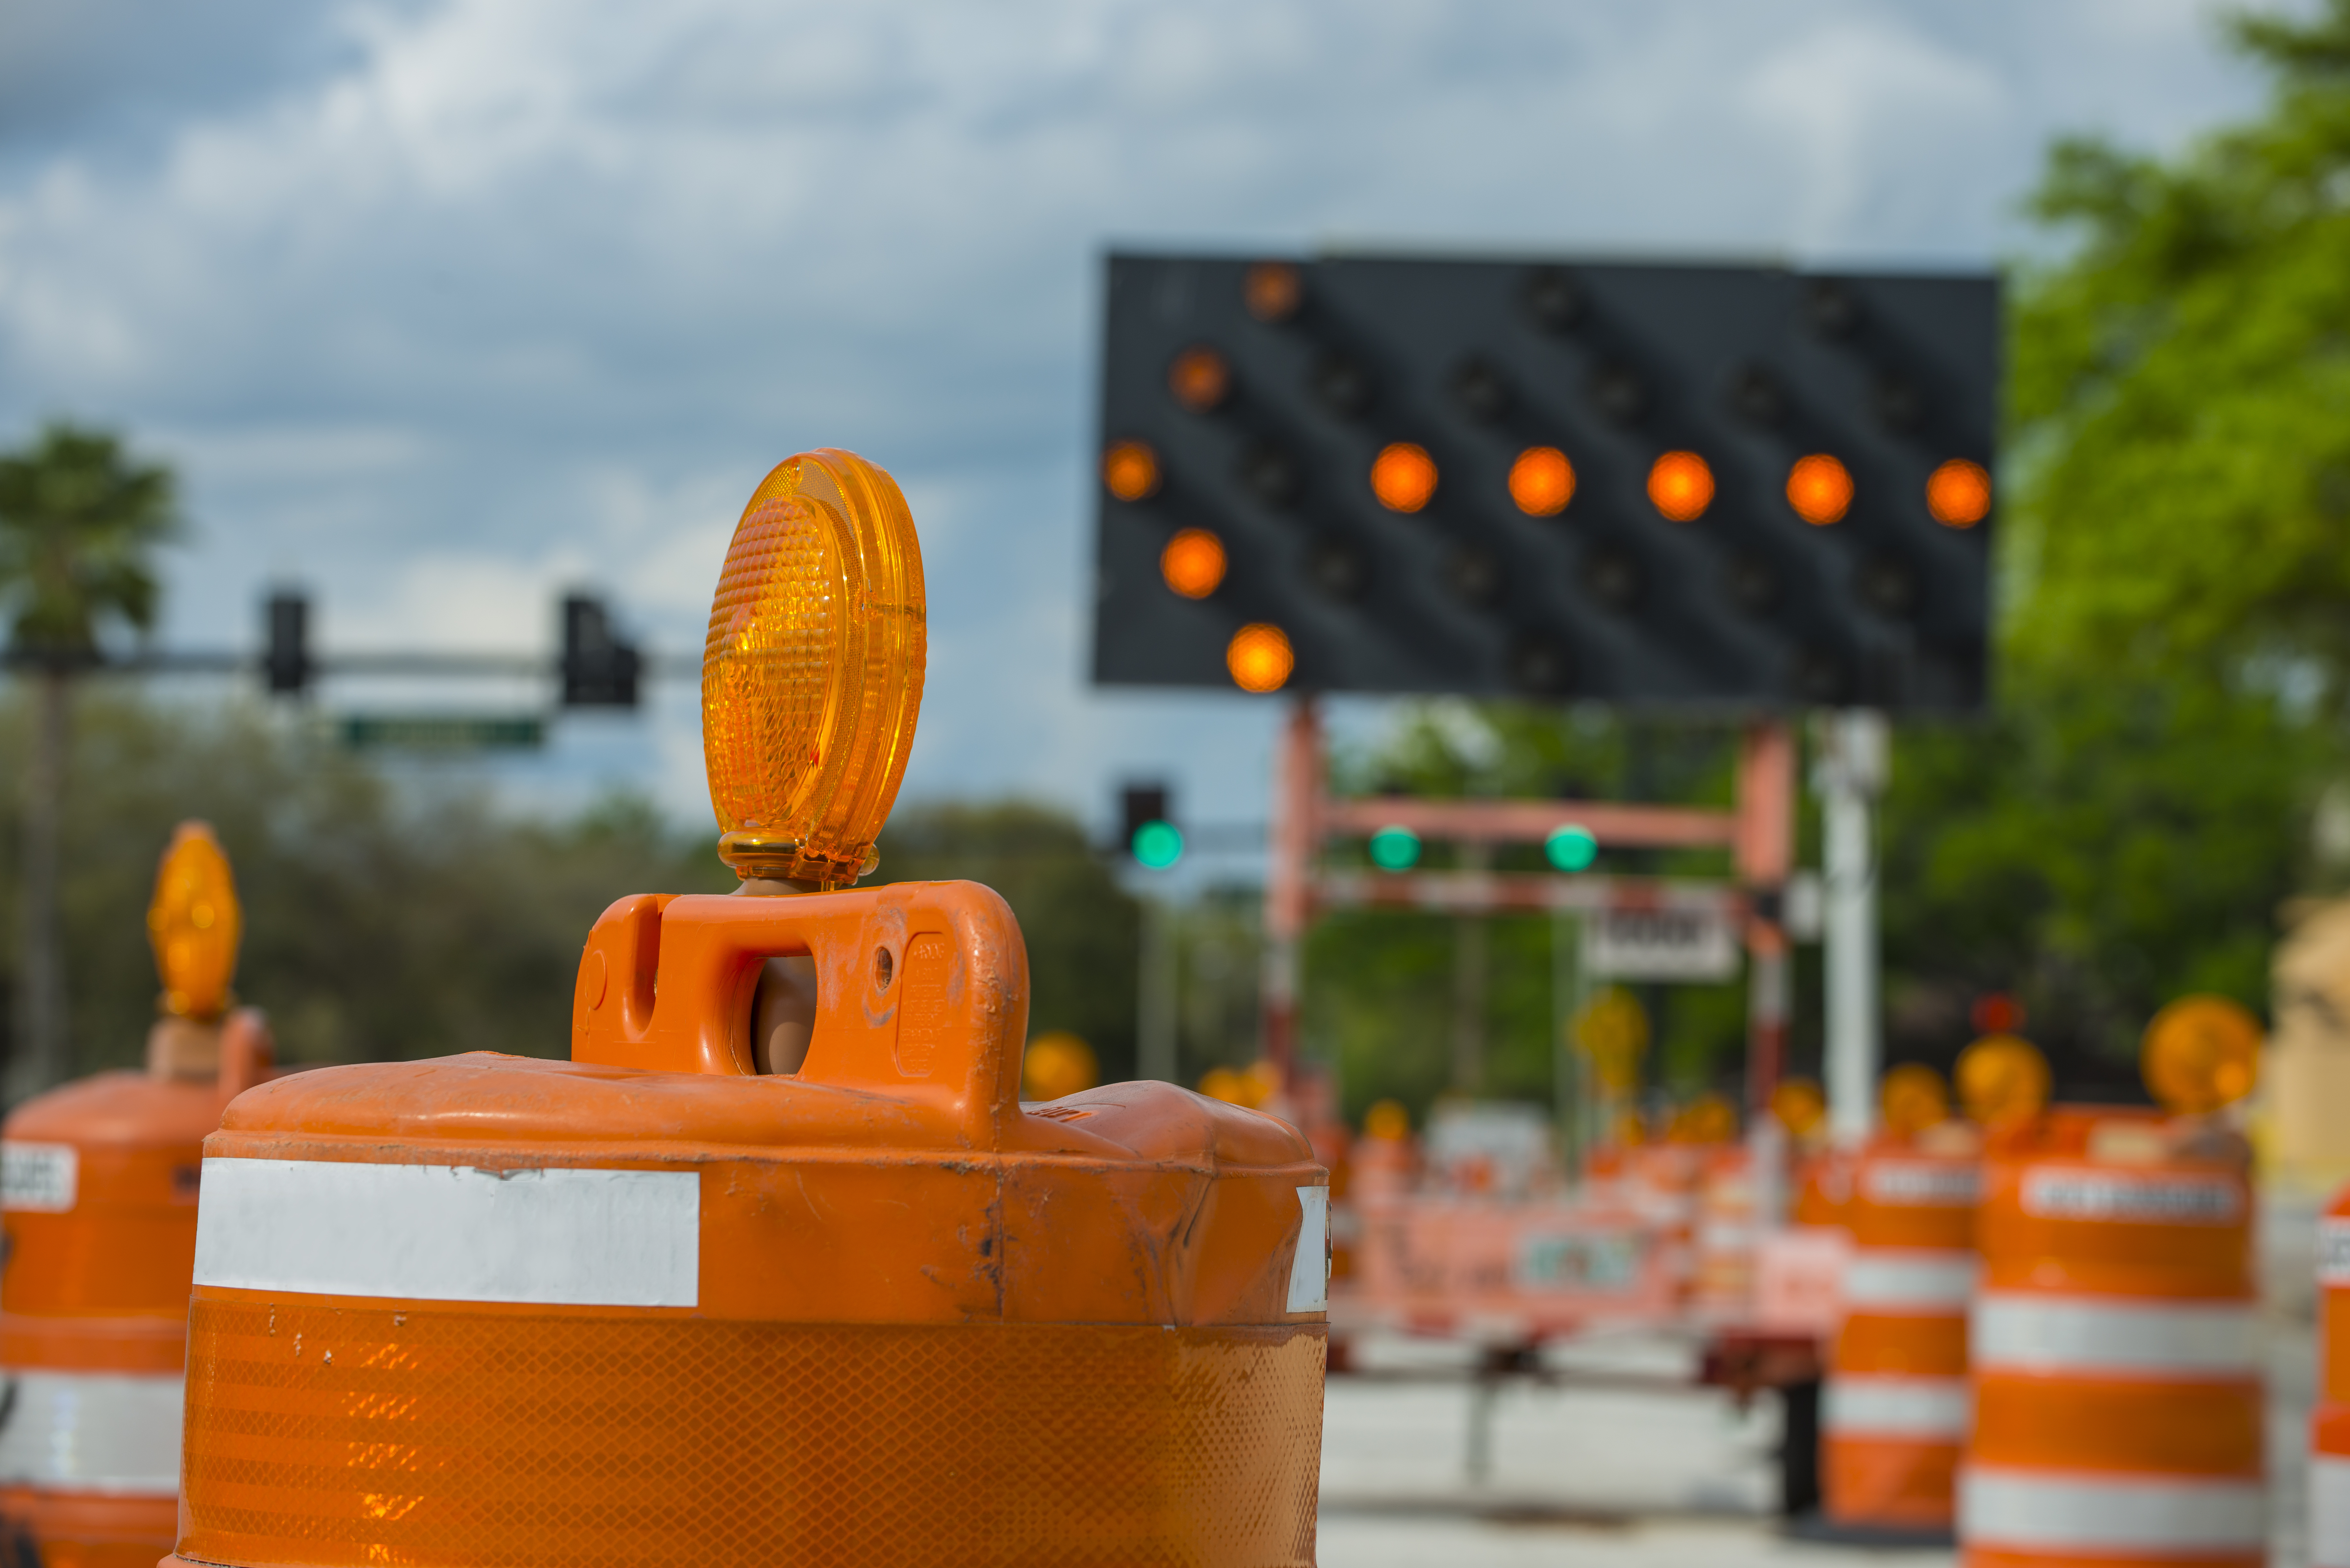 Traffic barrels and cones surround a road construction site with a large electric sign with an arrow pointing left in the background